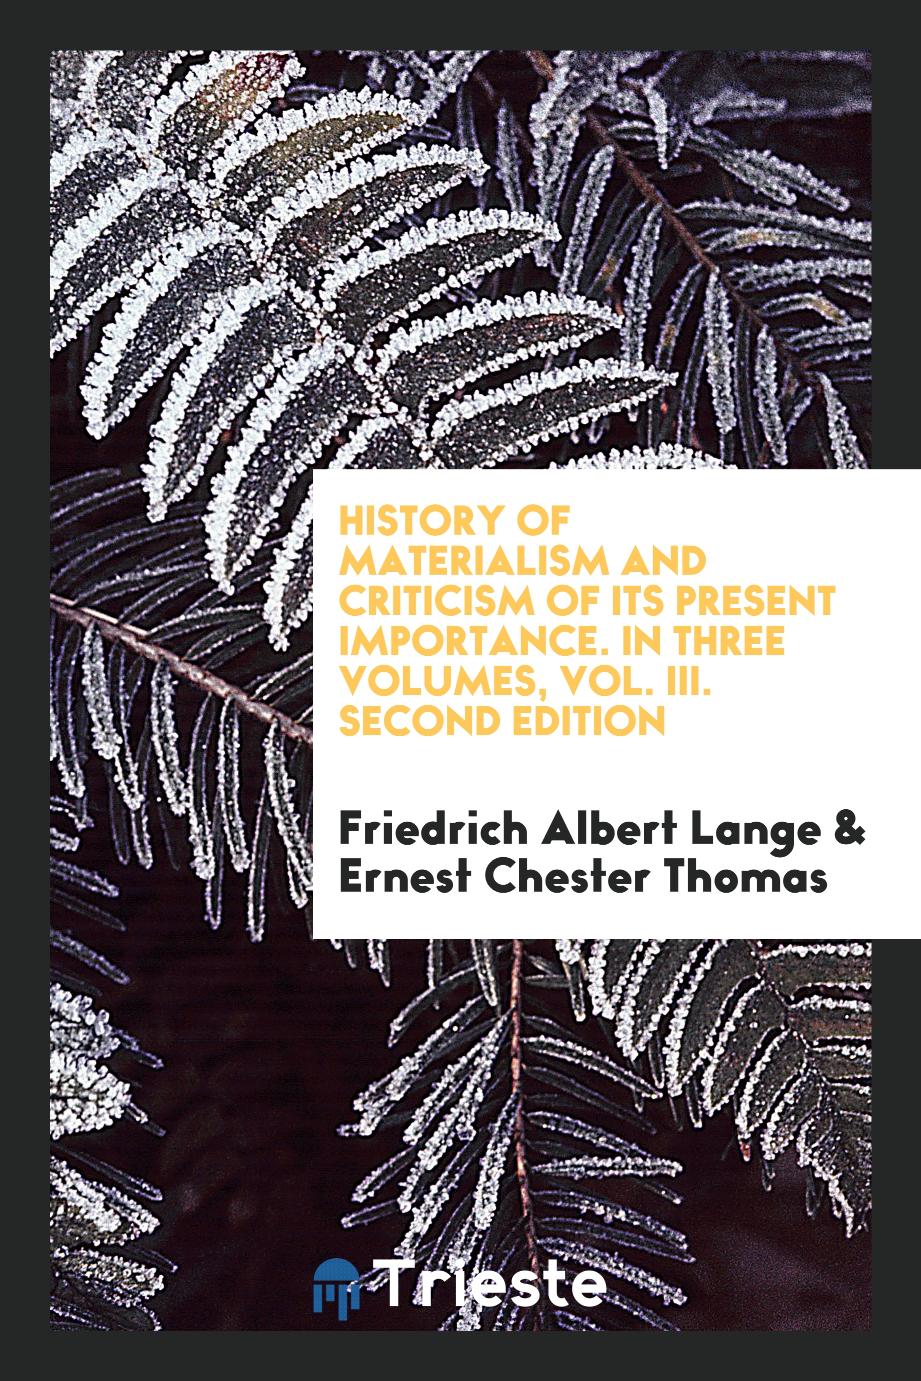 History of Materialism and Criticism of Its Present Importance. In Three Volumes, Vol. III. Second Edition